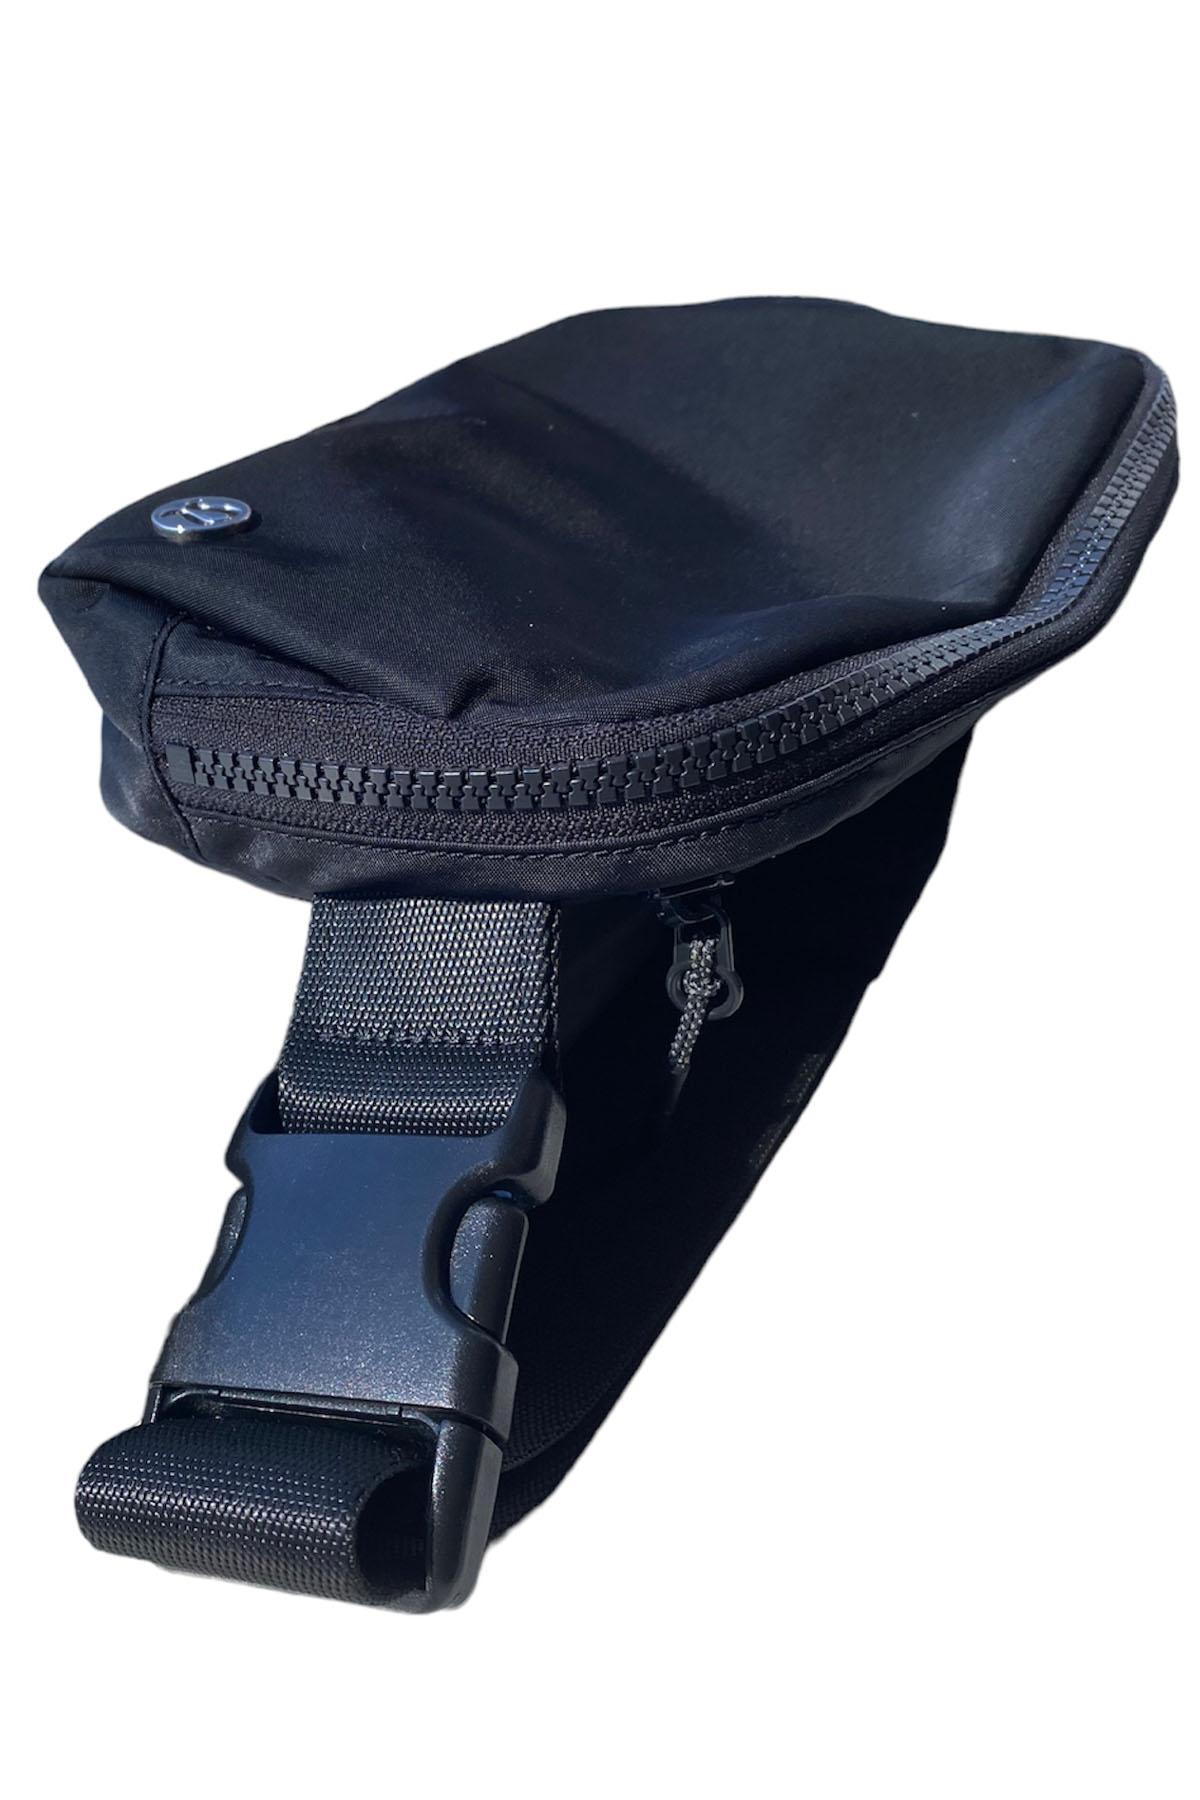 side view picture of the buckle of a black lululemon belt bag.